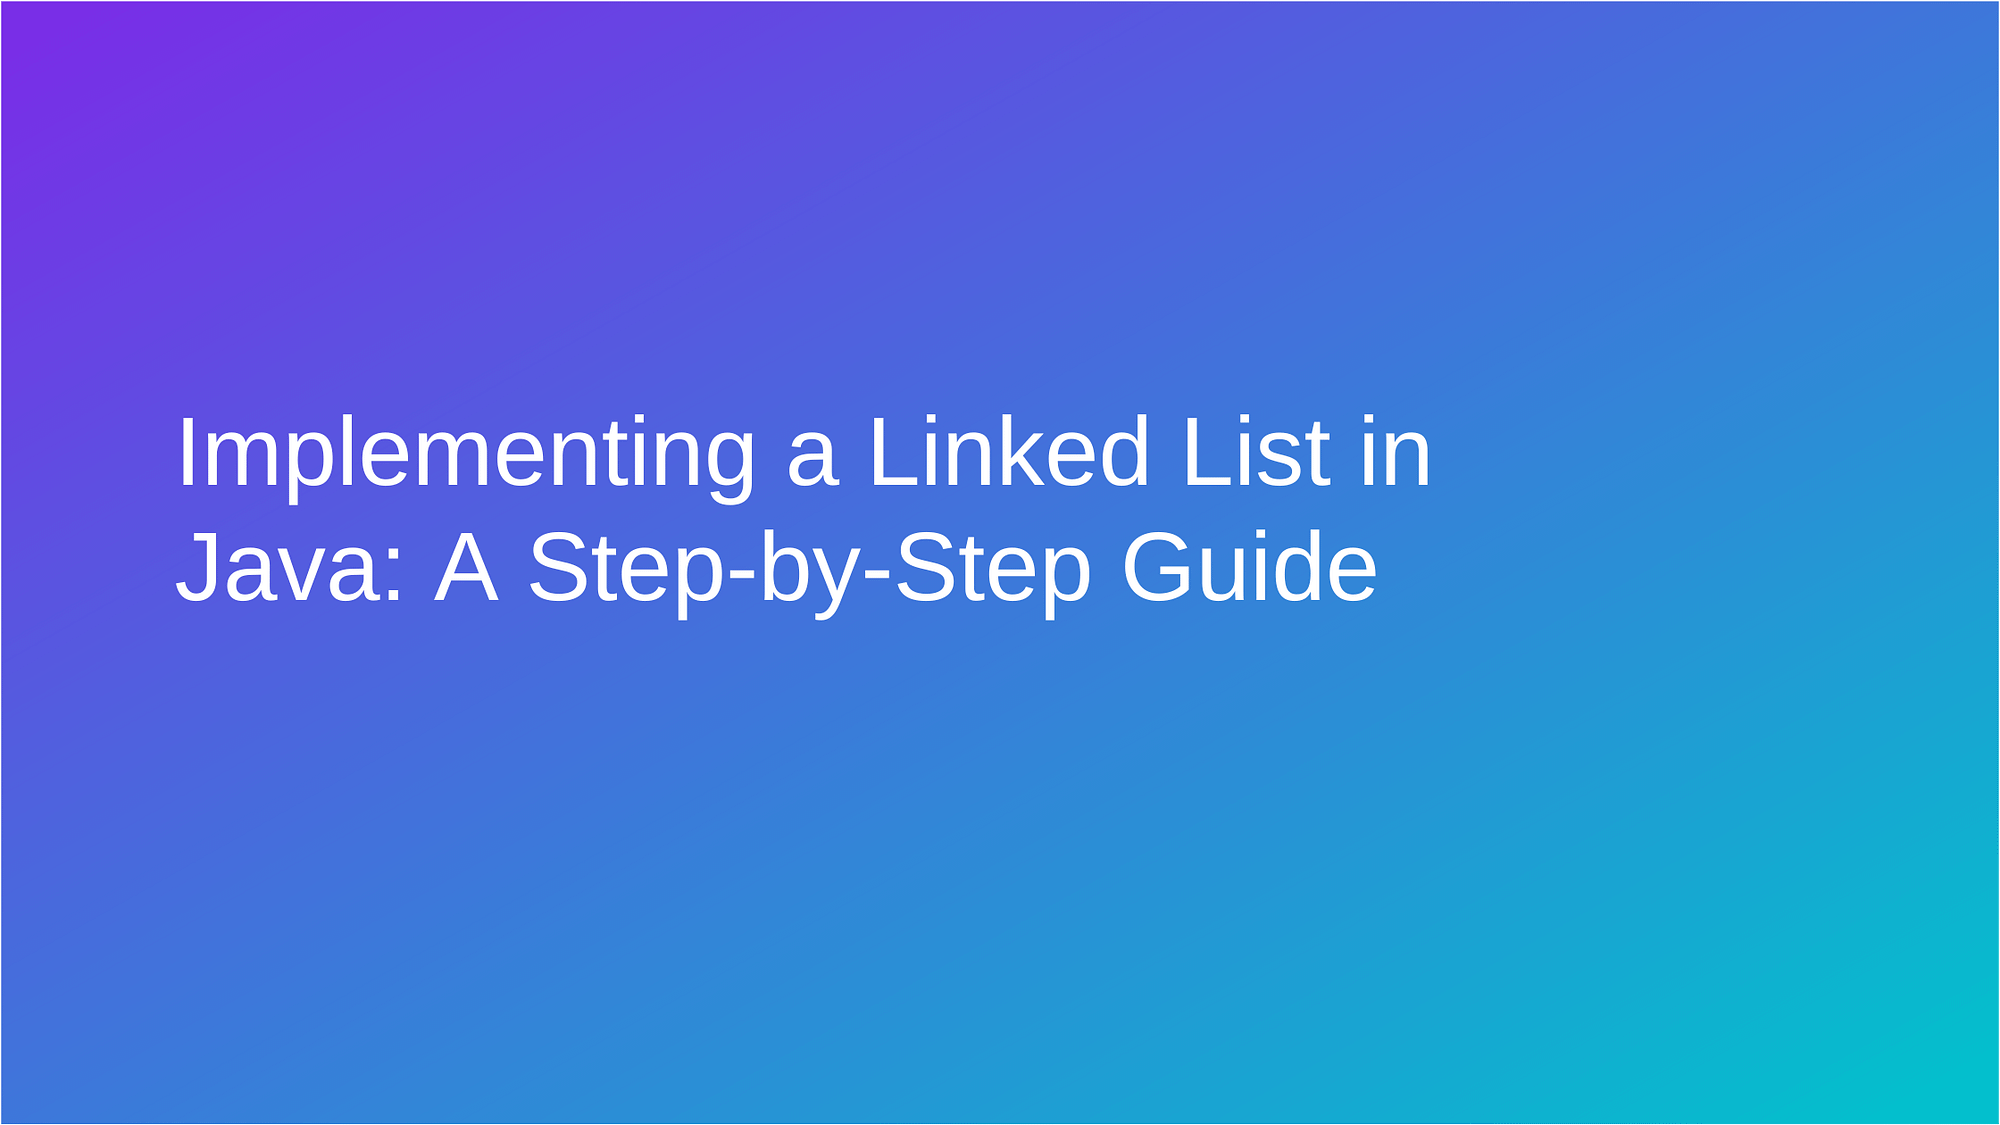 implementing-a-linked-list-in-java-a-step-by-step-guide-timearrows